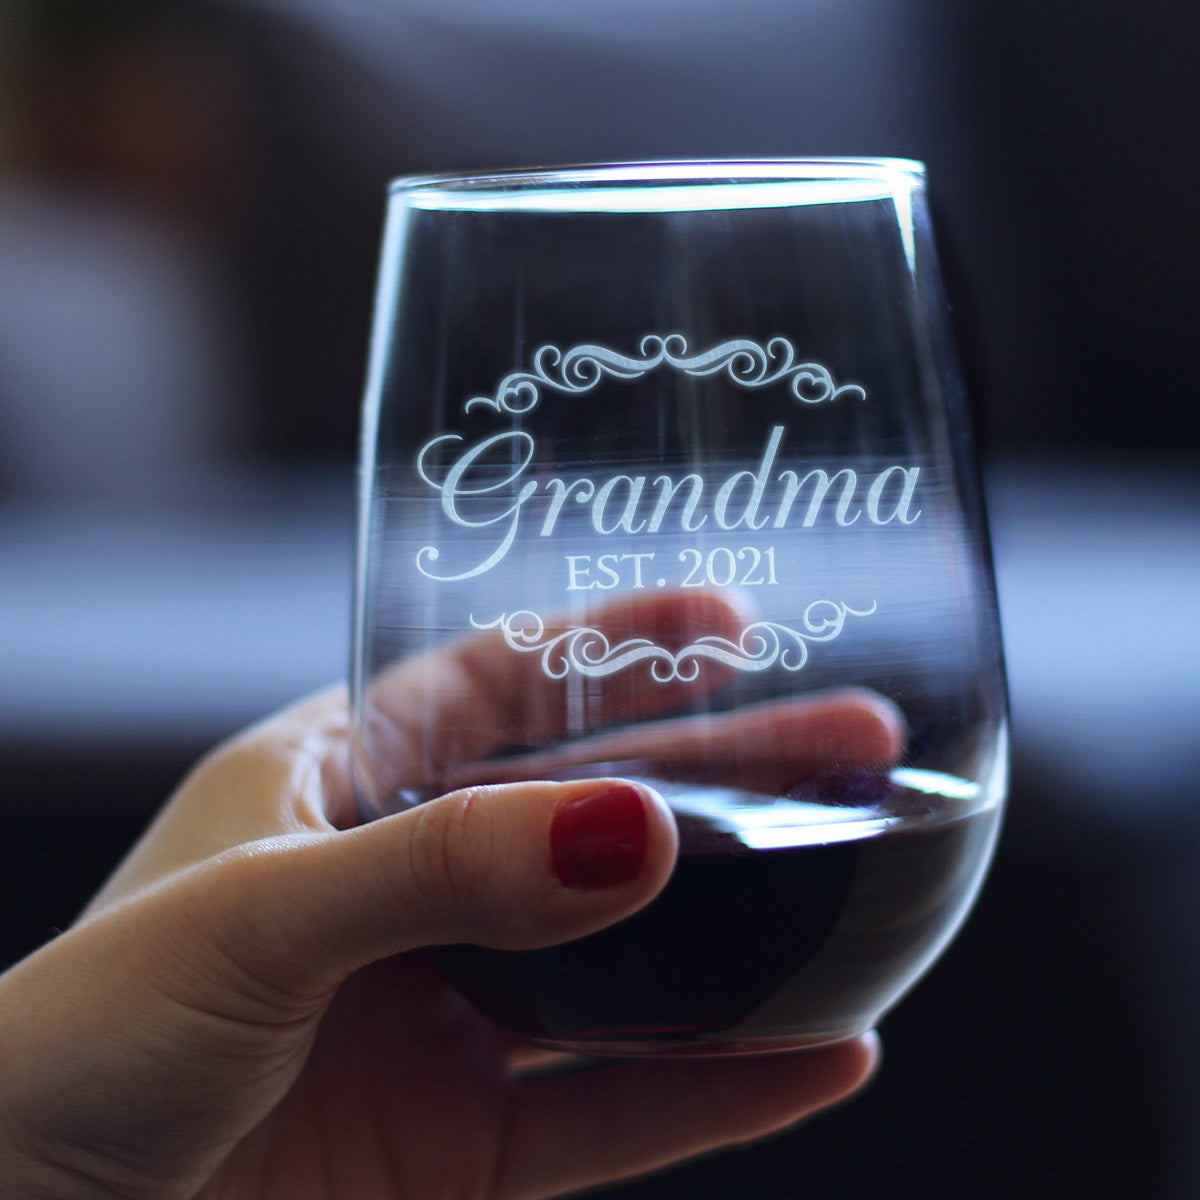 Grandma Est 2021 - New Grandmother Stemless Wine Glass Gift for First Time Grandparents - Decorative 17 Oz Large Glasses